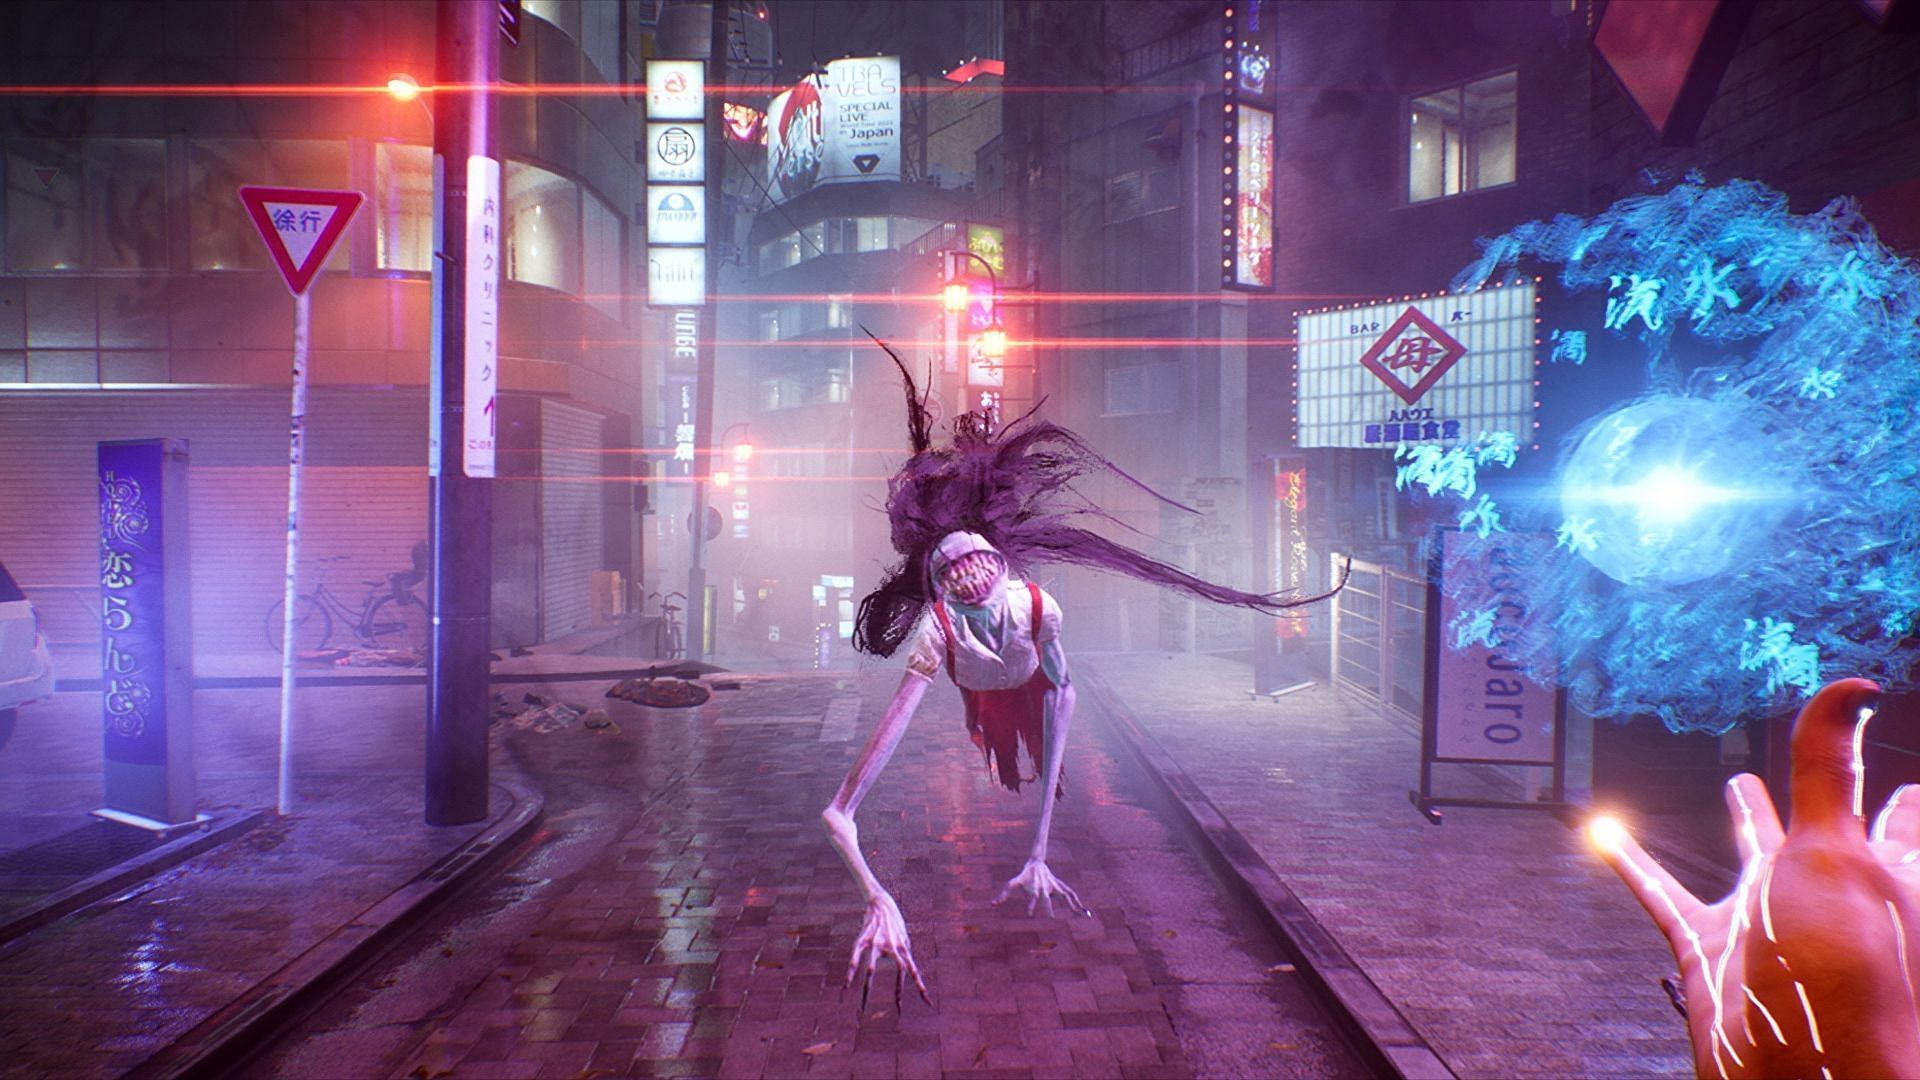 Once players harness enough of the souls from the Yokai, they will be able to use the Amenotori X ability, and be able to traverse the area much easier (Image via Tango Gameworks)